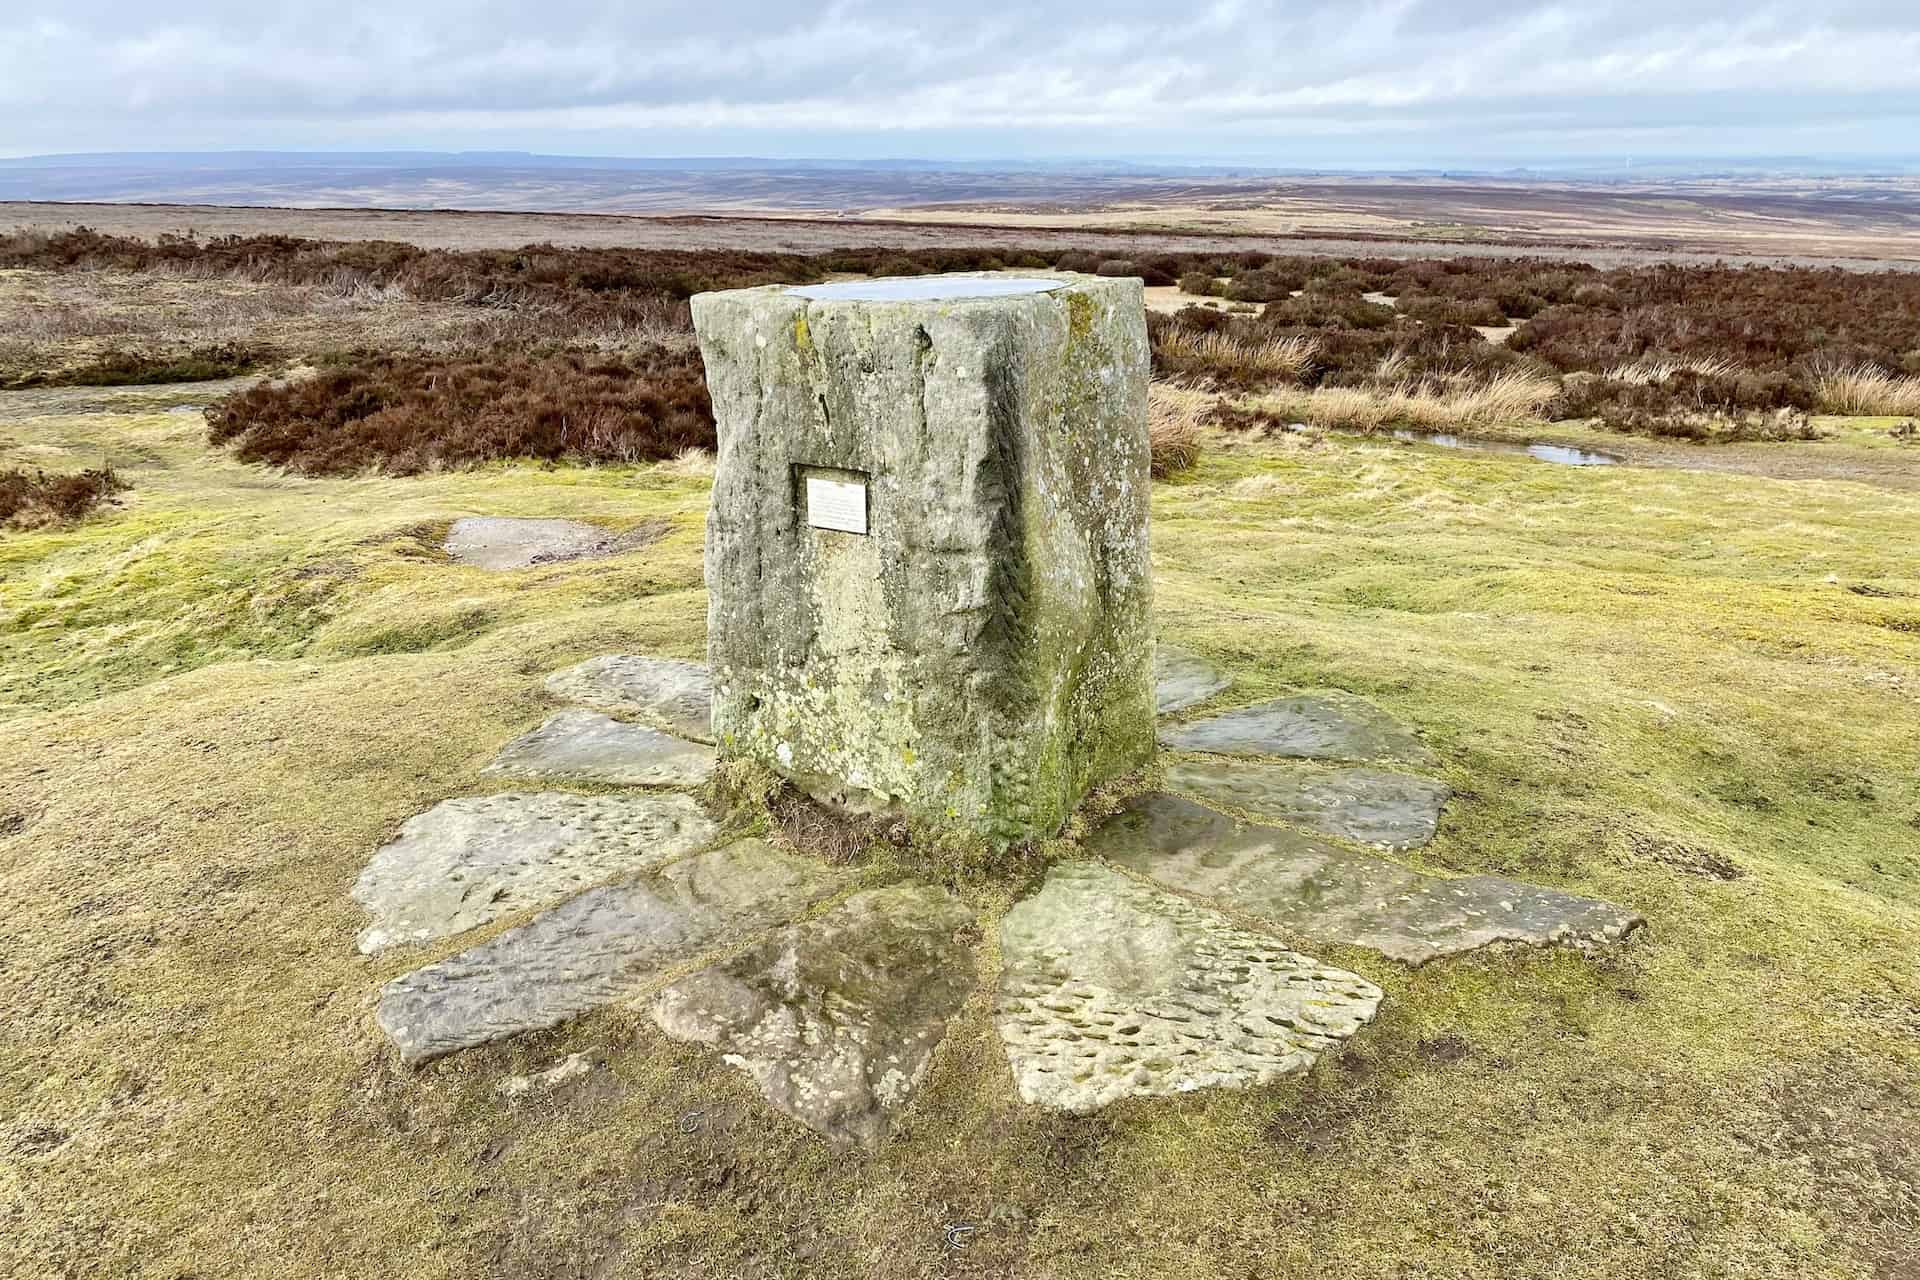 A toposcope stands on the hill on a concrete block near Danby Beacon. Toposcopes are typically found at elevated vantage points, such as hills or summits.